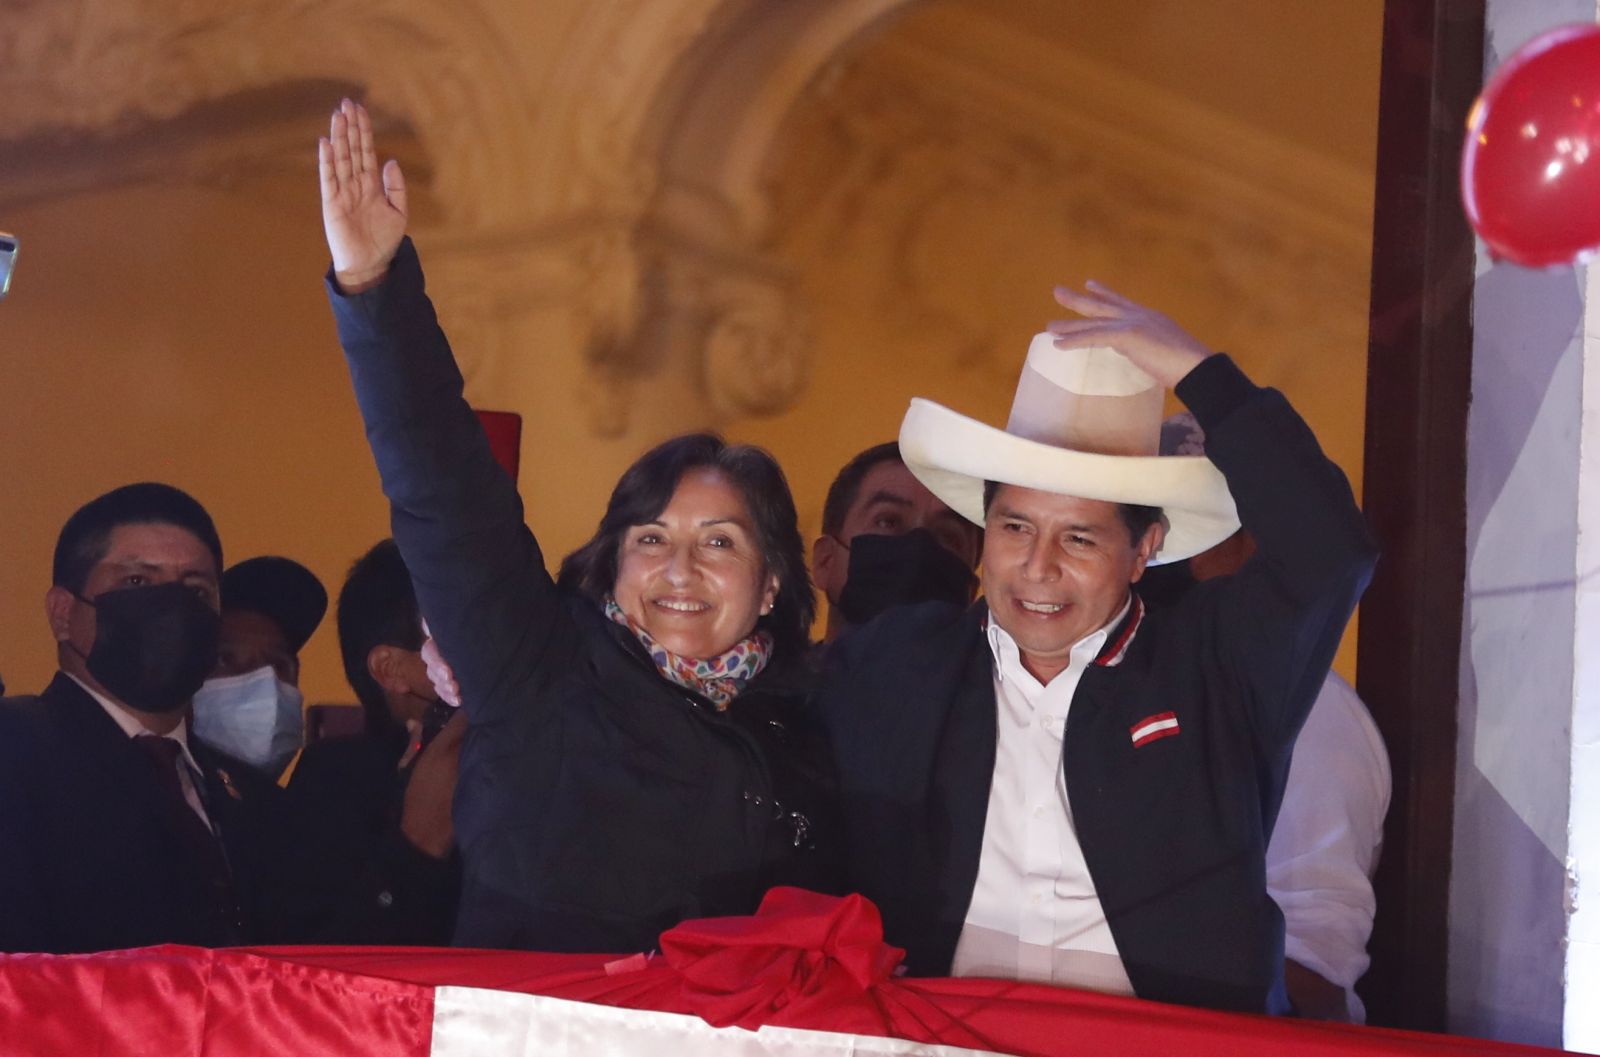 epa09353988 The leftist Pedro Castillo (R), accompanied by his formula to the Vice Presidency Dina Boluarte, greets supporters from a balcony after being proclaimed president-elect of the country, in Lima, Peru 19 July 2021. The official proclamation came this Monday, a month and a half after the elections in which he defeated the right-wing Keiko Fujimori, who delayed his appointment with more than a thousand challenges in which she denounced alleged 'fraud' without reliable evidence. After declaring the latest legal appeals presented by Fujimori unfounded, the National Elections Jury (JNE) endorsed the results of the 06 June vote, where Castillo obtained 50.12% of the valid votes, a narrow victory by just 44,263 votes over Fujimori.  EPA/Paolo Aguilar